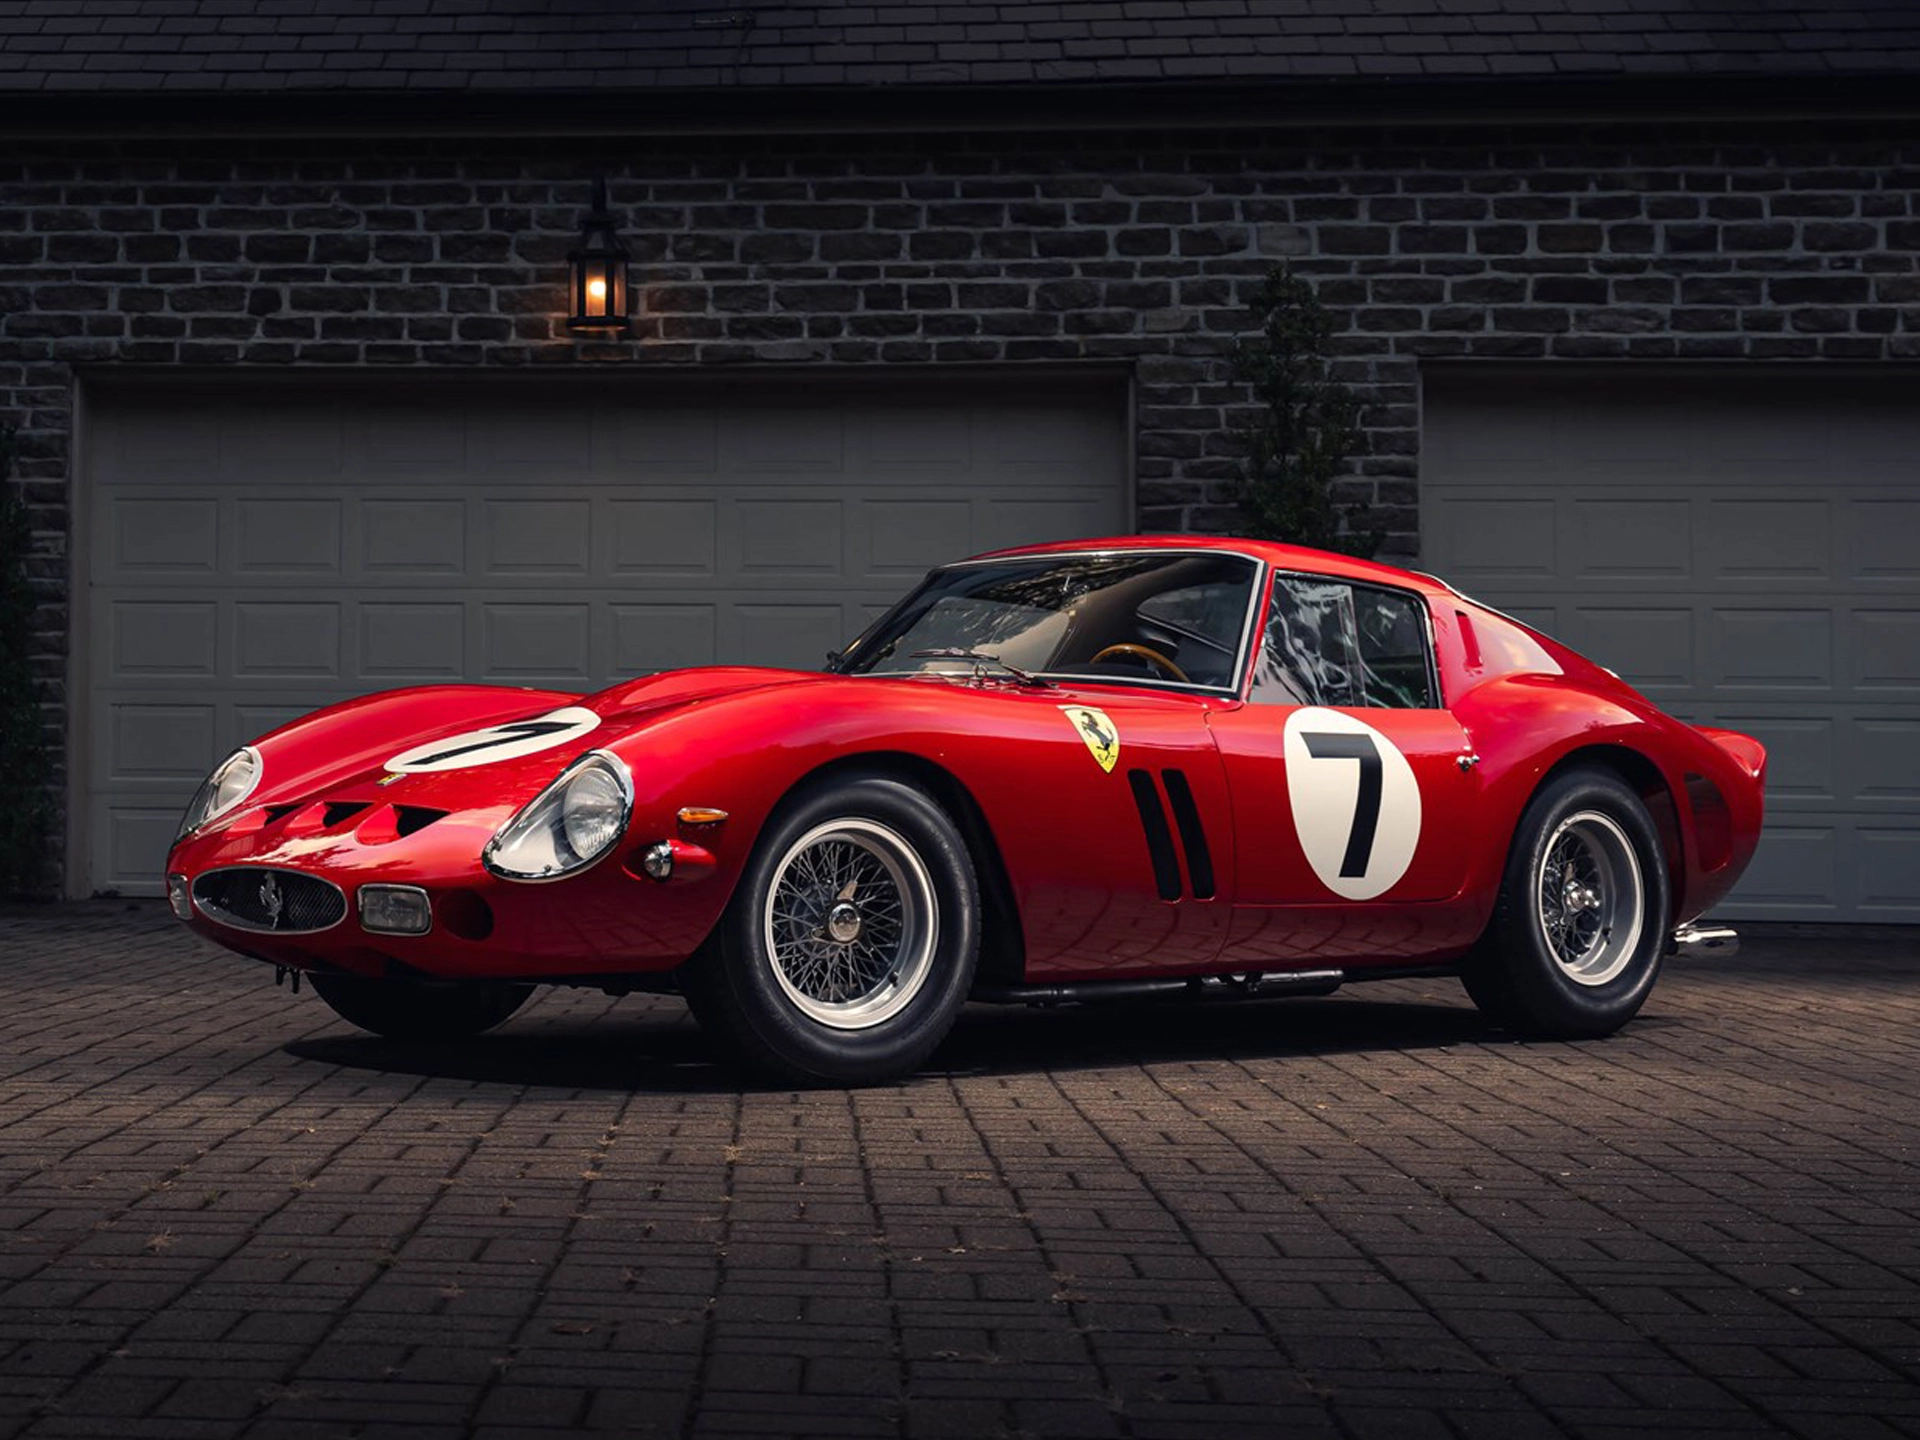 Ferrari 250 GTO in New York. Which way does the scale tip? image